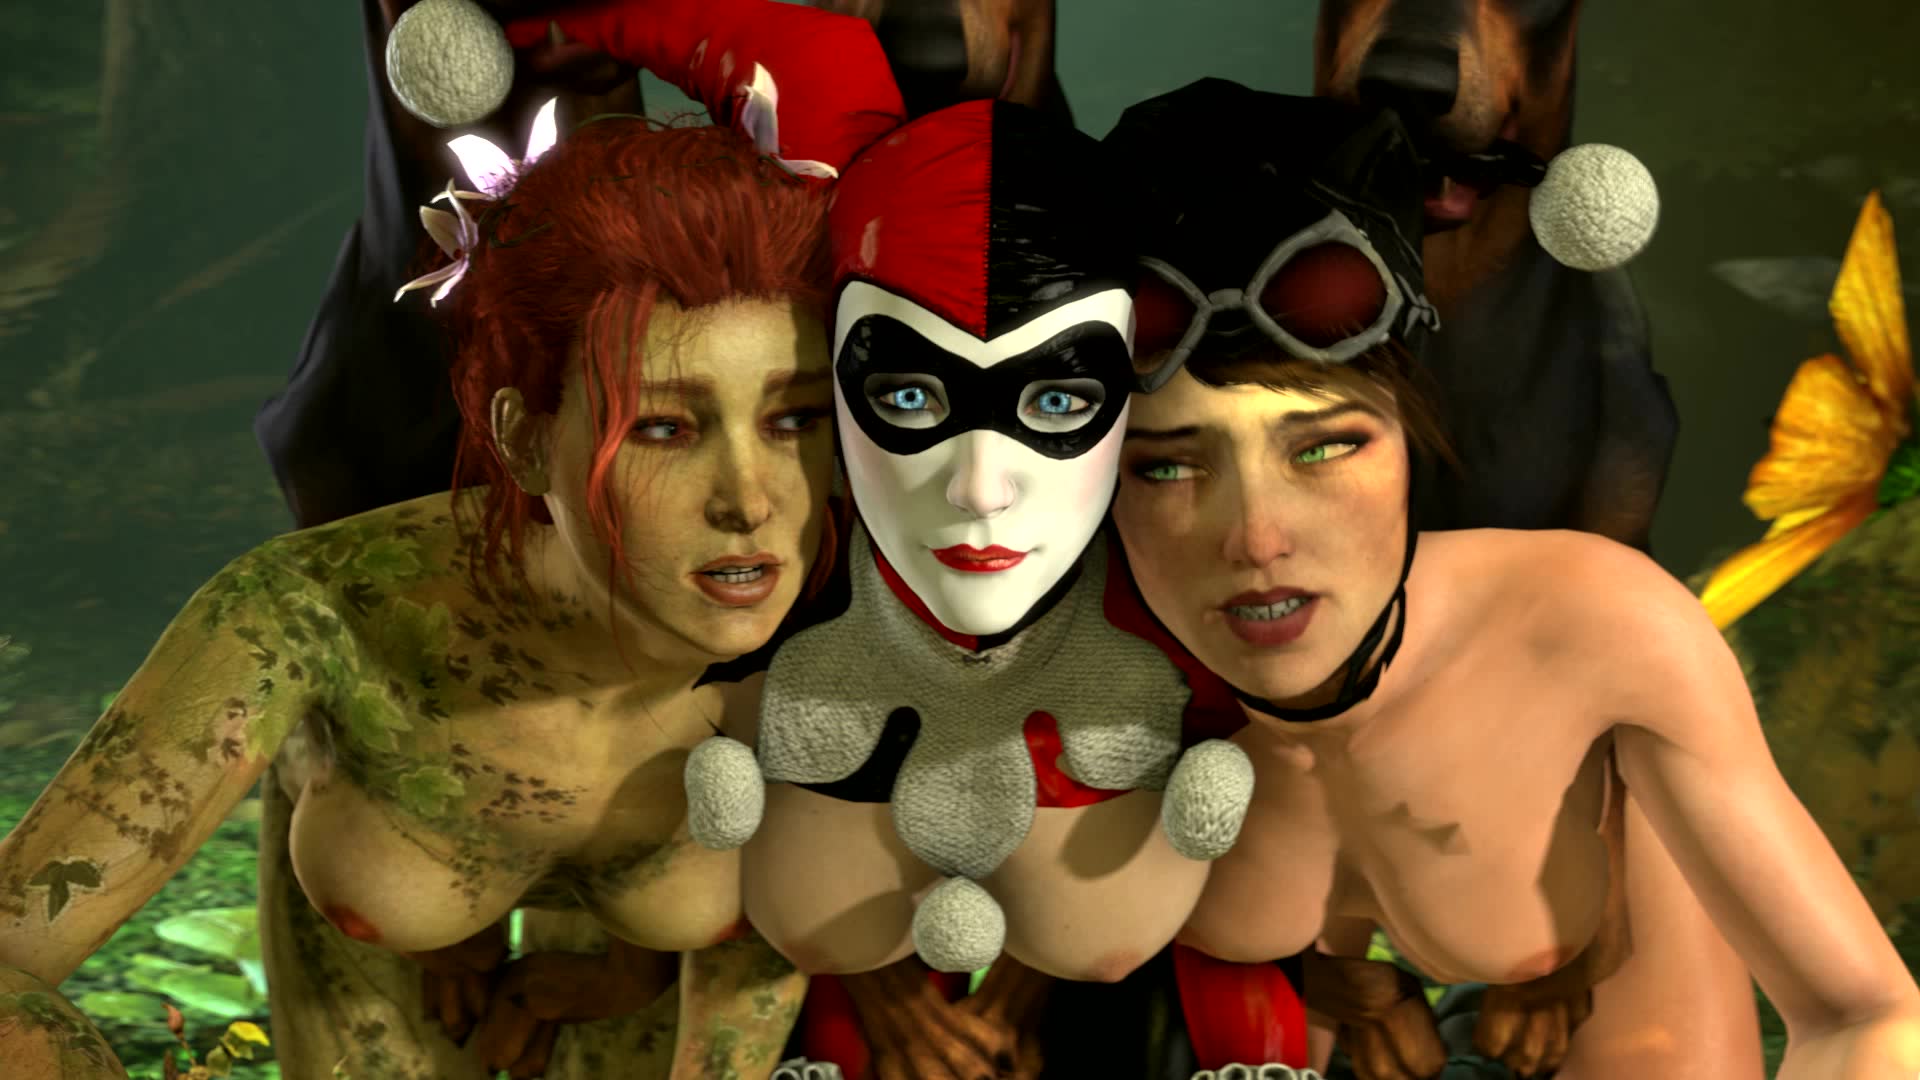 Ivy, Harley and Catwoman’s threesome with dogs – DC Comics NSFW animation thumbnail